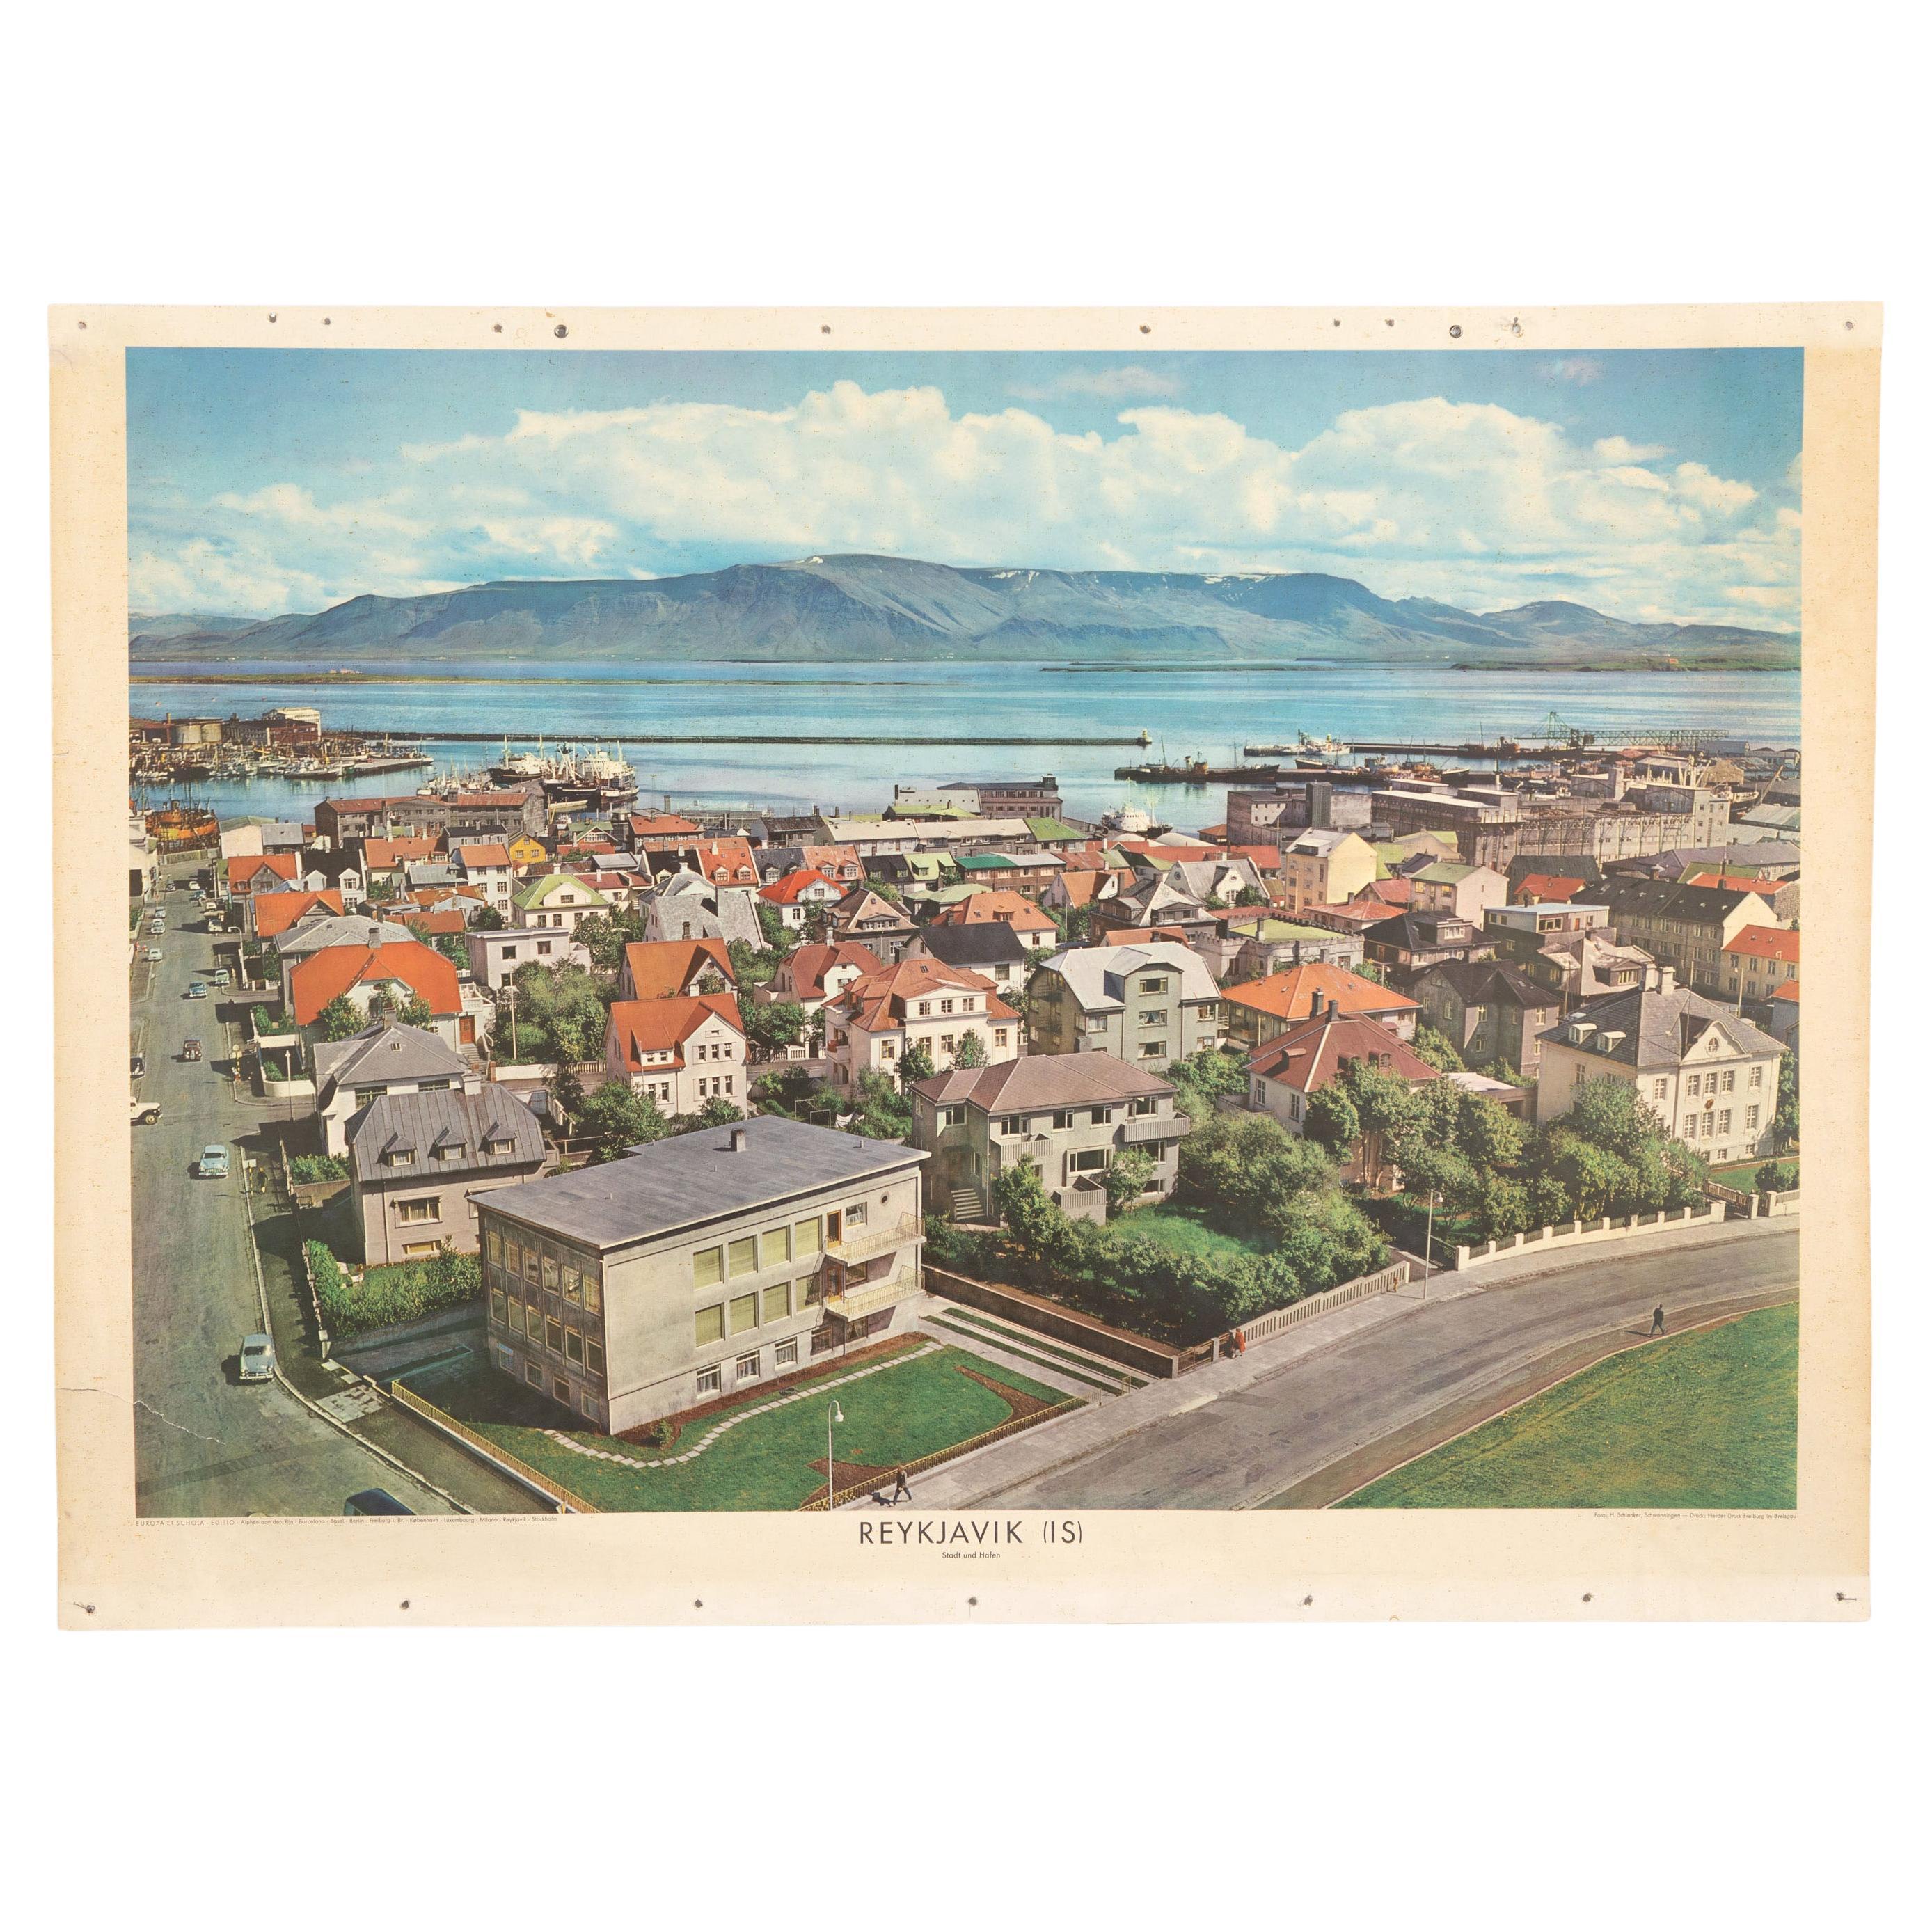 School Wall Chart Reykjavik (IS) City and Port For Sale